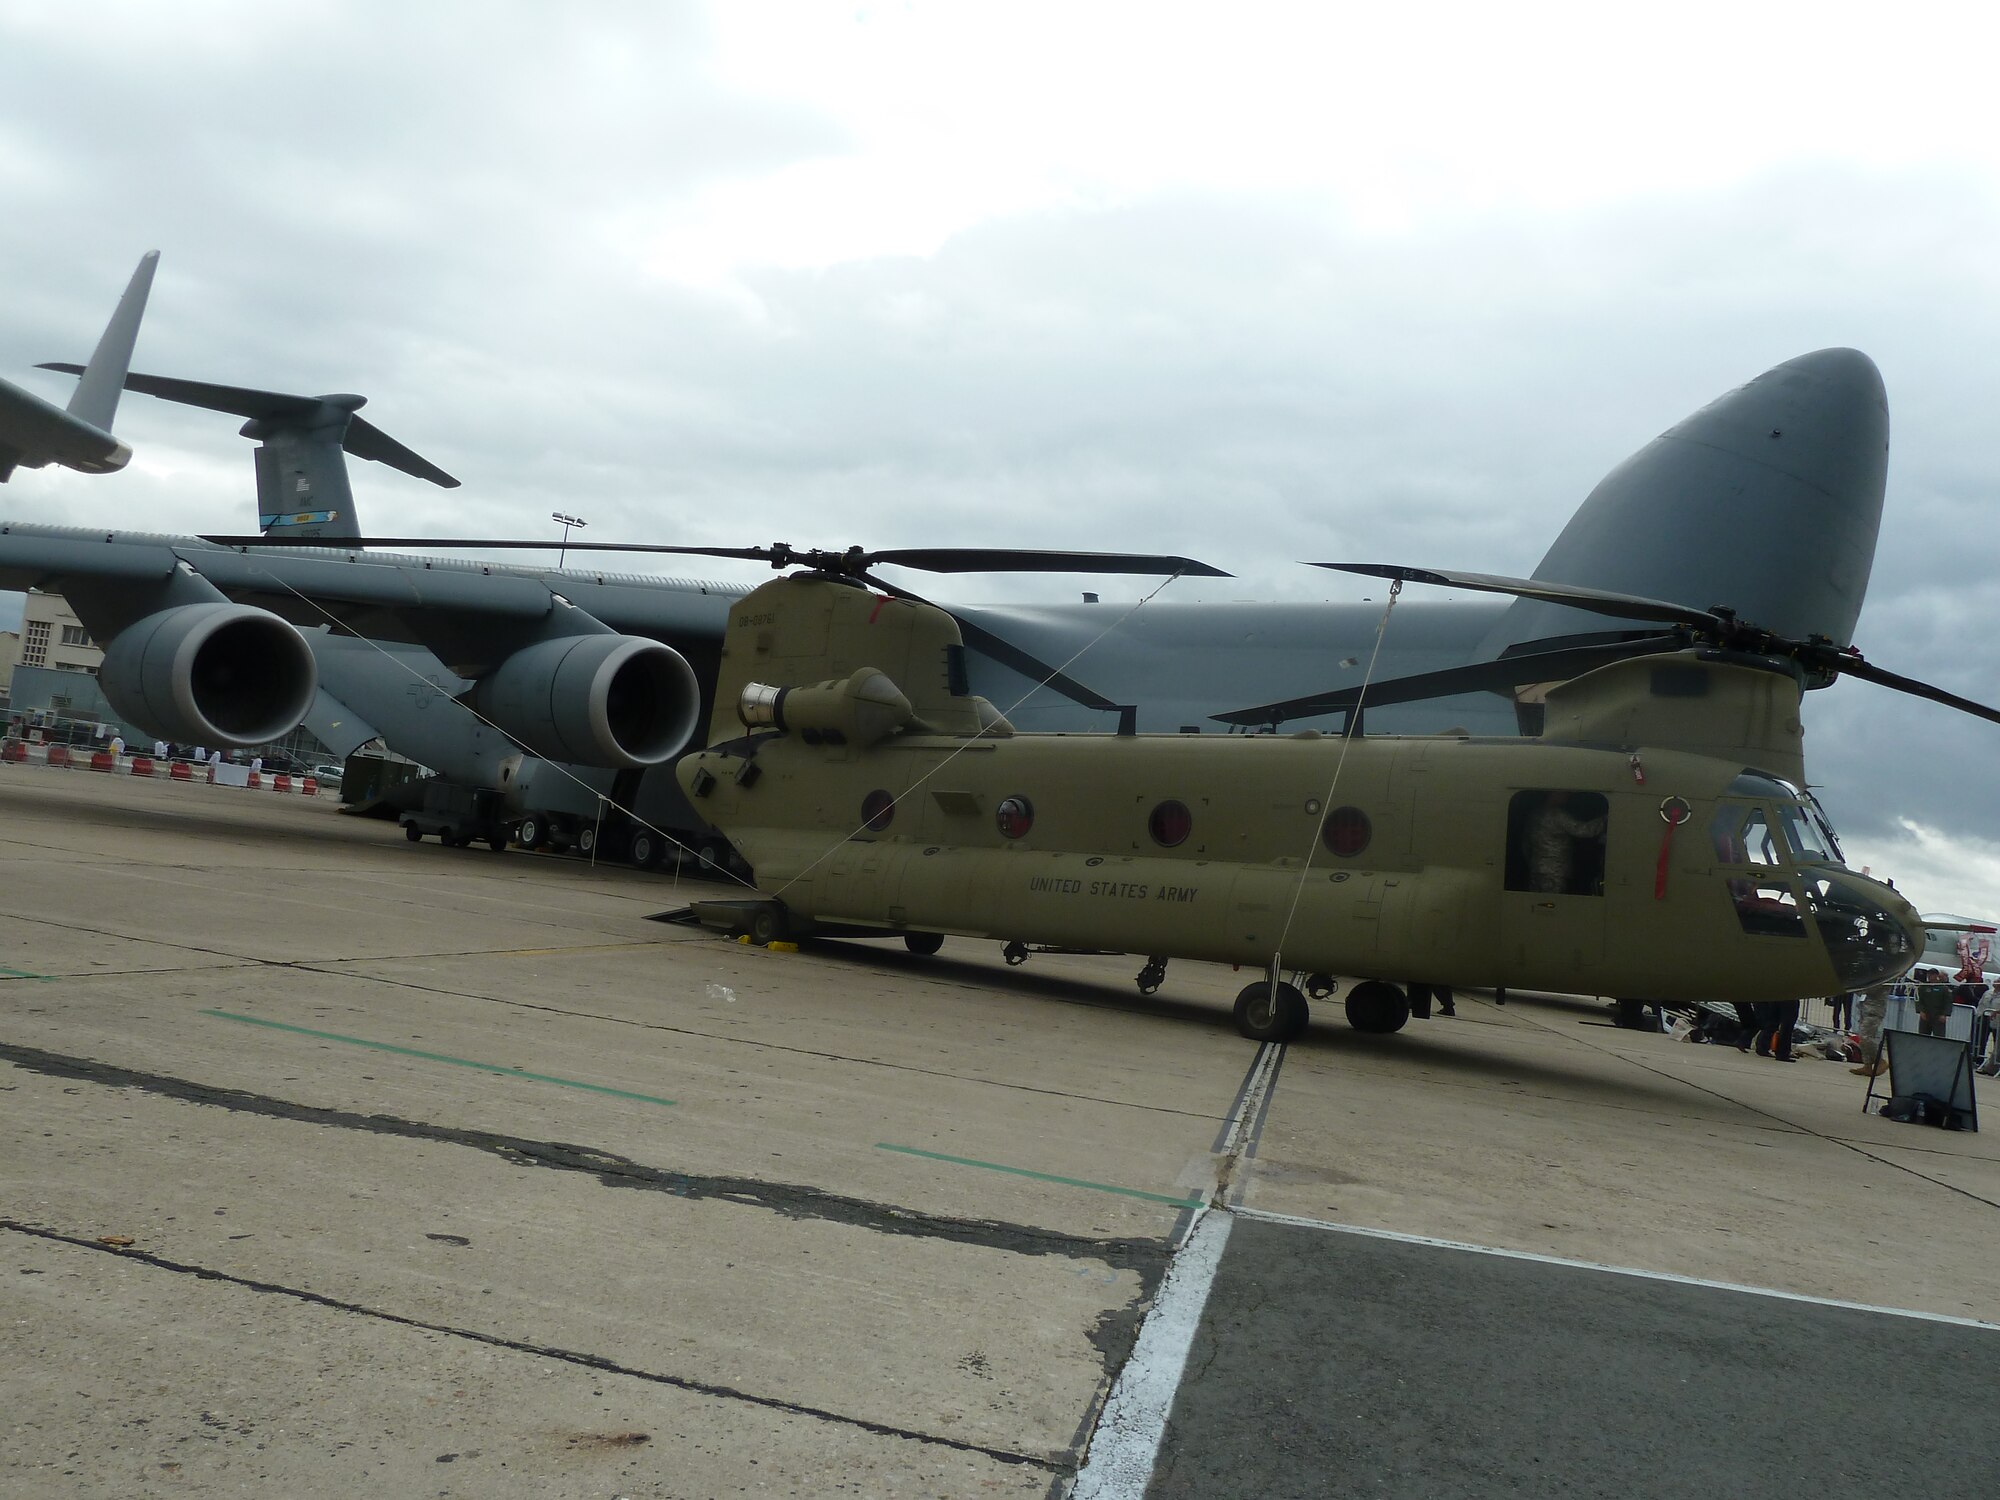 An Army CH-47F Chinook and the Air Force C-5M Super Galaxy are two of the 11 U.S. aircraft on display at the 49th International Paris Air Show, Le Bourget Airport, France, June 20-26. The C-5M transported the Chinook to the show and both aircraft are making a first appearance at the event. (U.S. Air Force photo/Tech. Sgt. Francesca Popp)